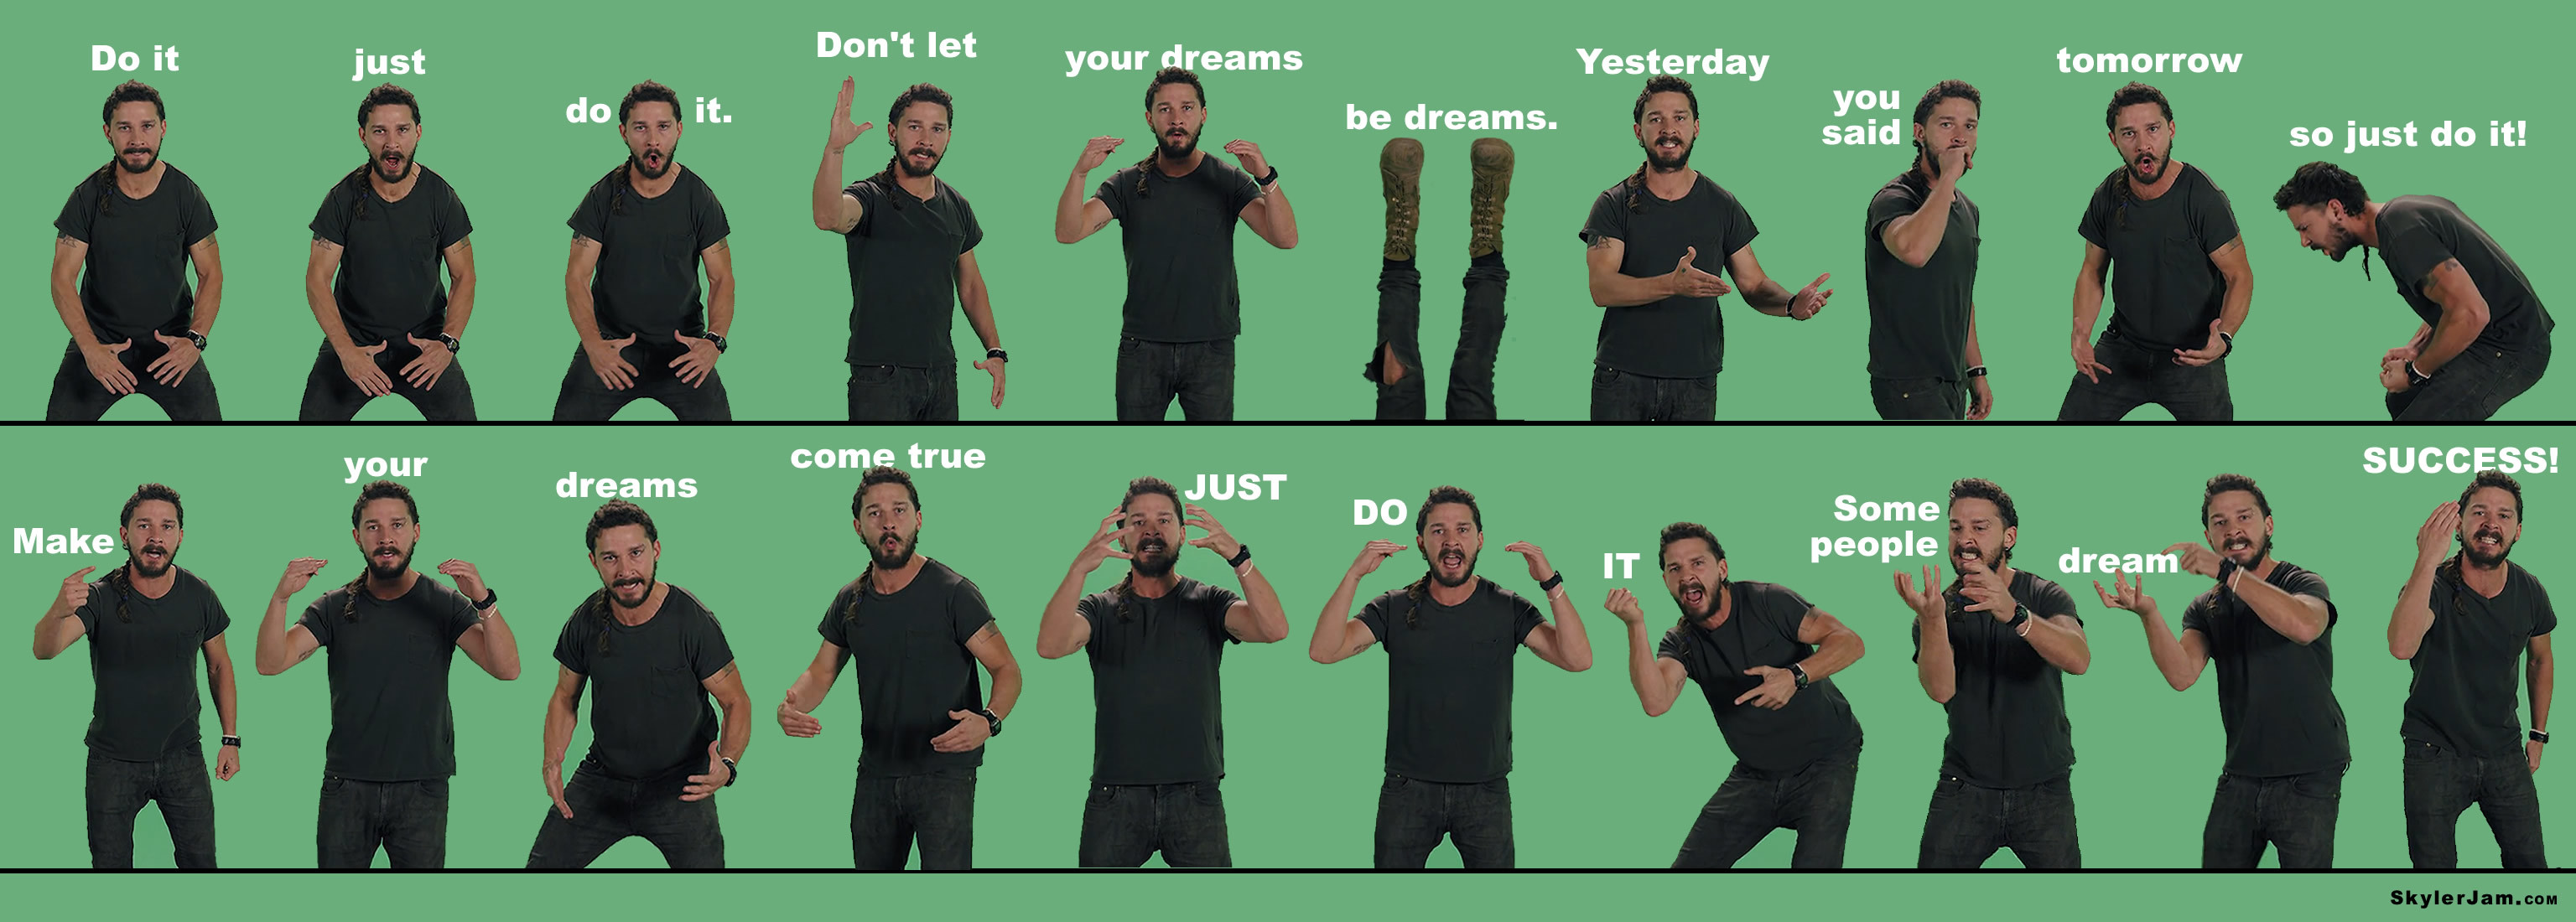 Shia motivation 20 Motivational Shia LaBeouf Poses and quotes to get you pumped for